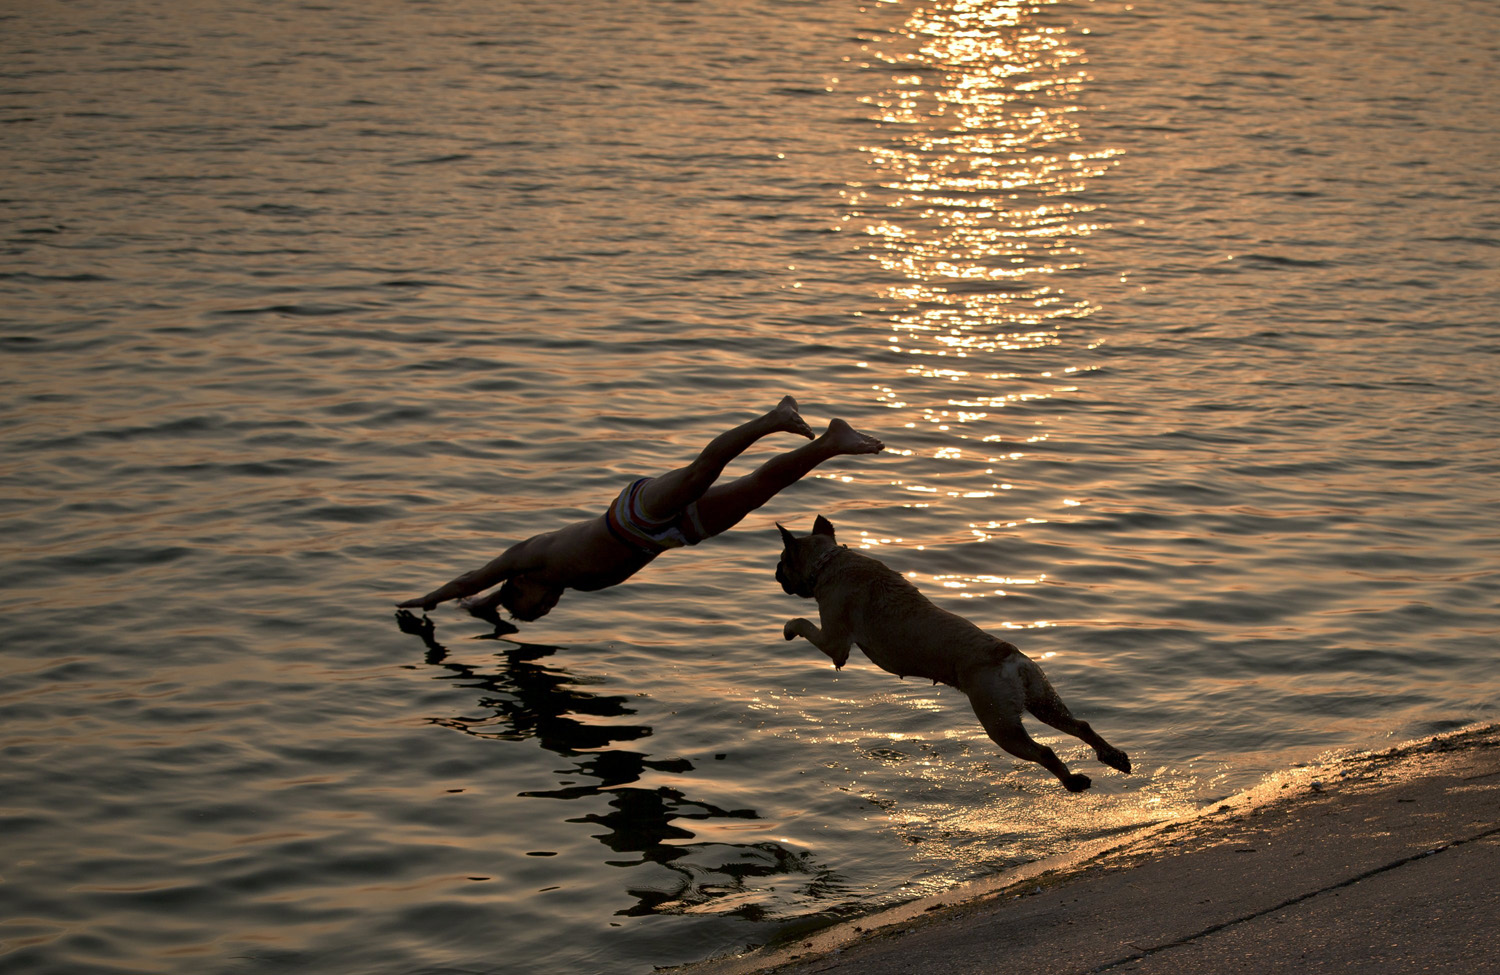 Aisha the dog follows her owner as he jumps into a lake at sunset in Bucharest, Romania on August 12, 2014.